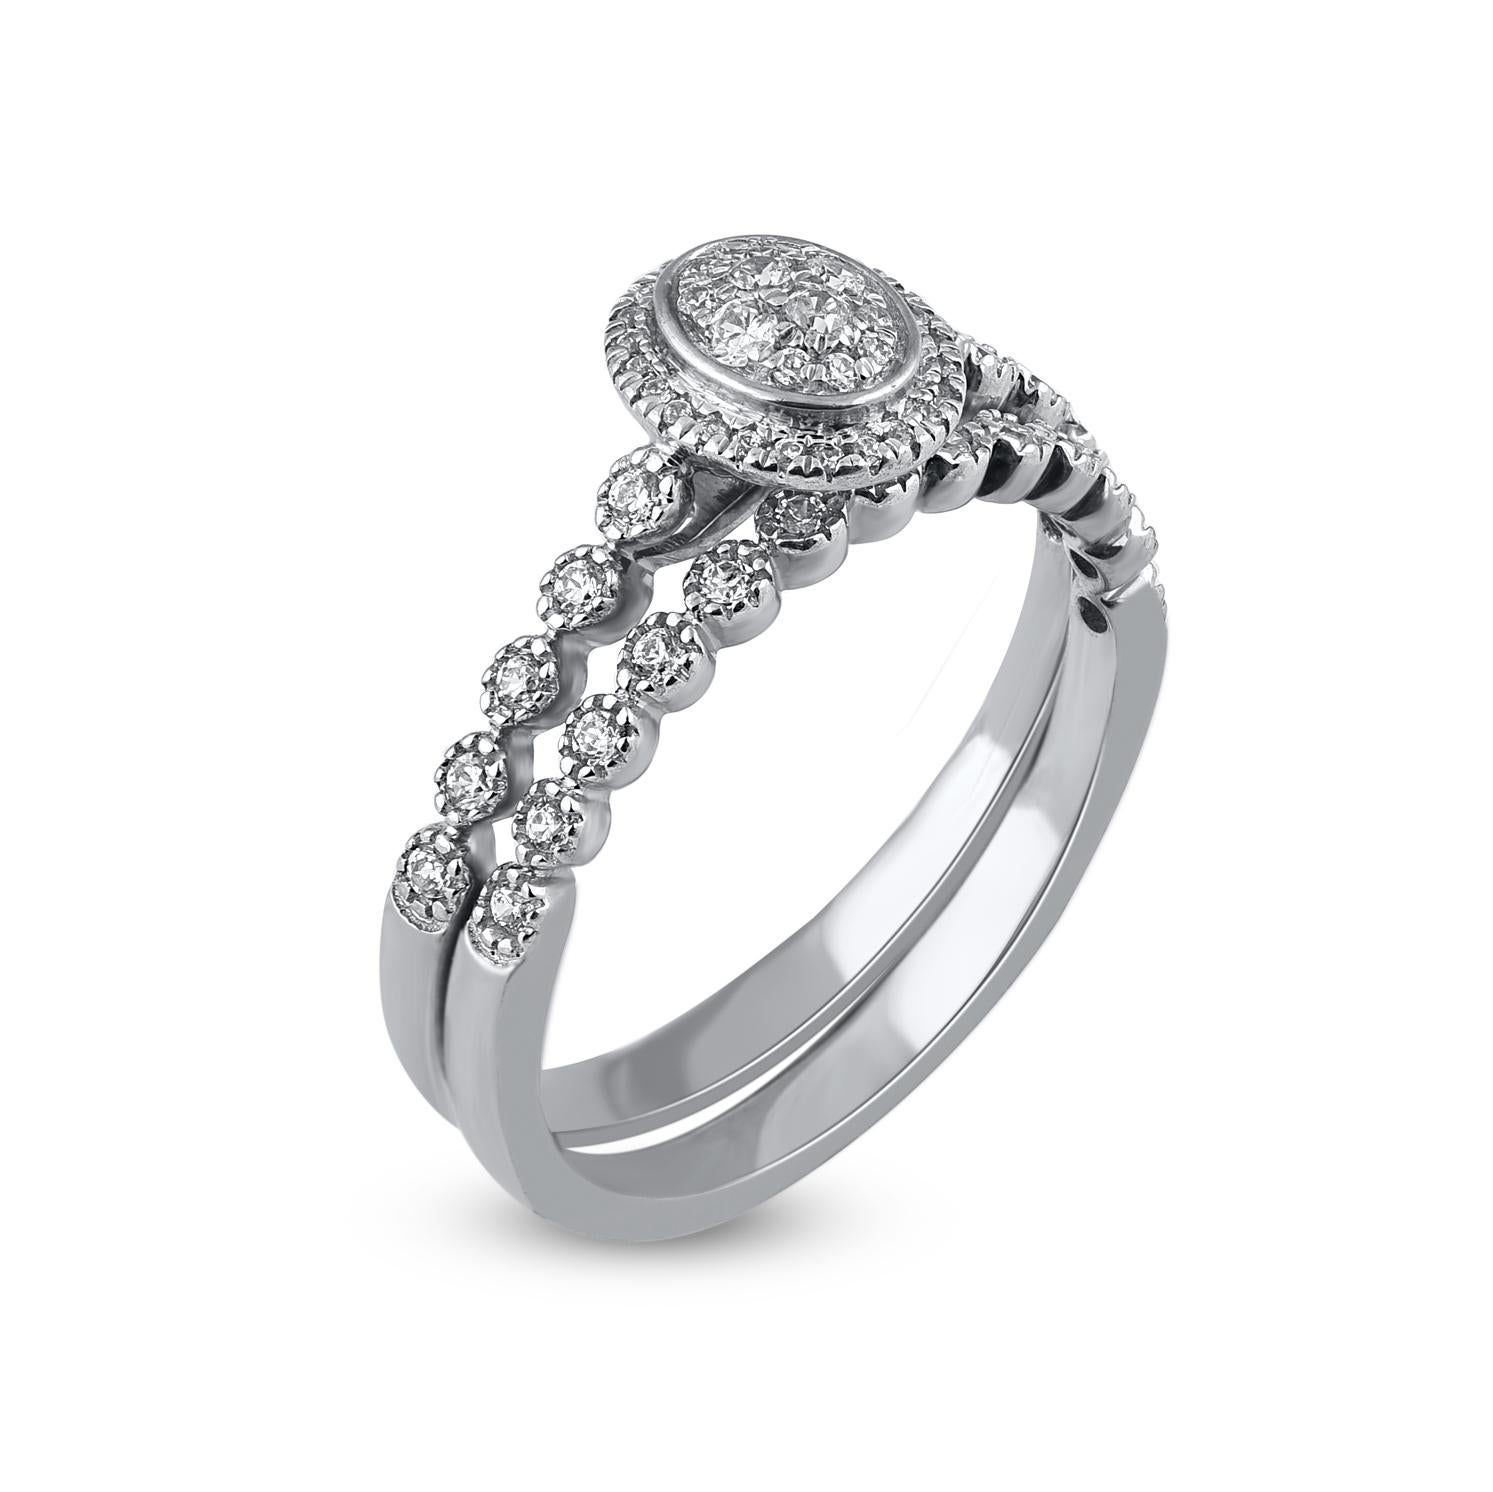 Let your love shine through this beautiful diamond bridal set. Crafted in 14 Karat white gold. This wedding ring features a sparkling 59 brilliant cut and single cut round diamond beautifully set in prong, pave and bezel setting. The total diamond